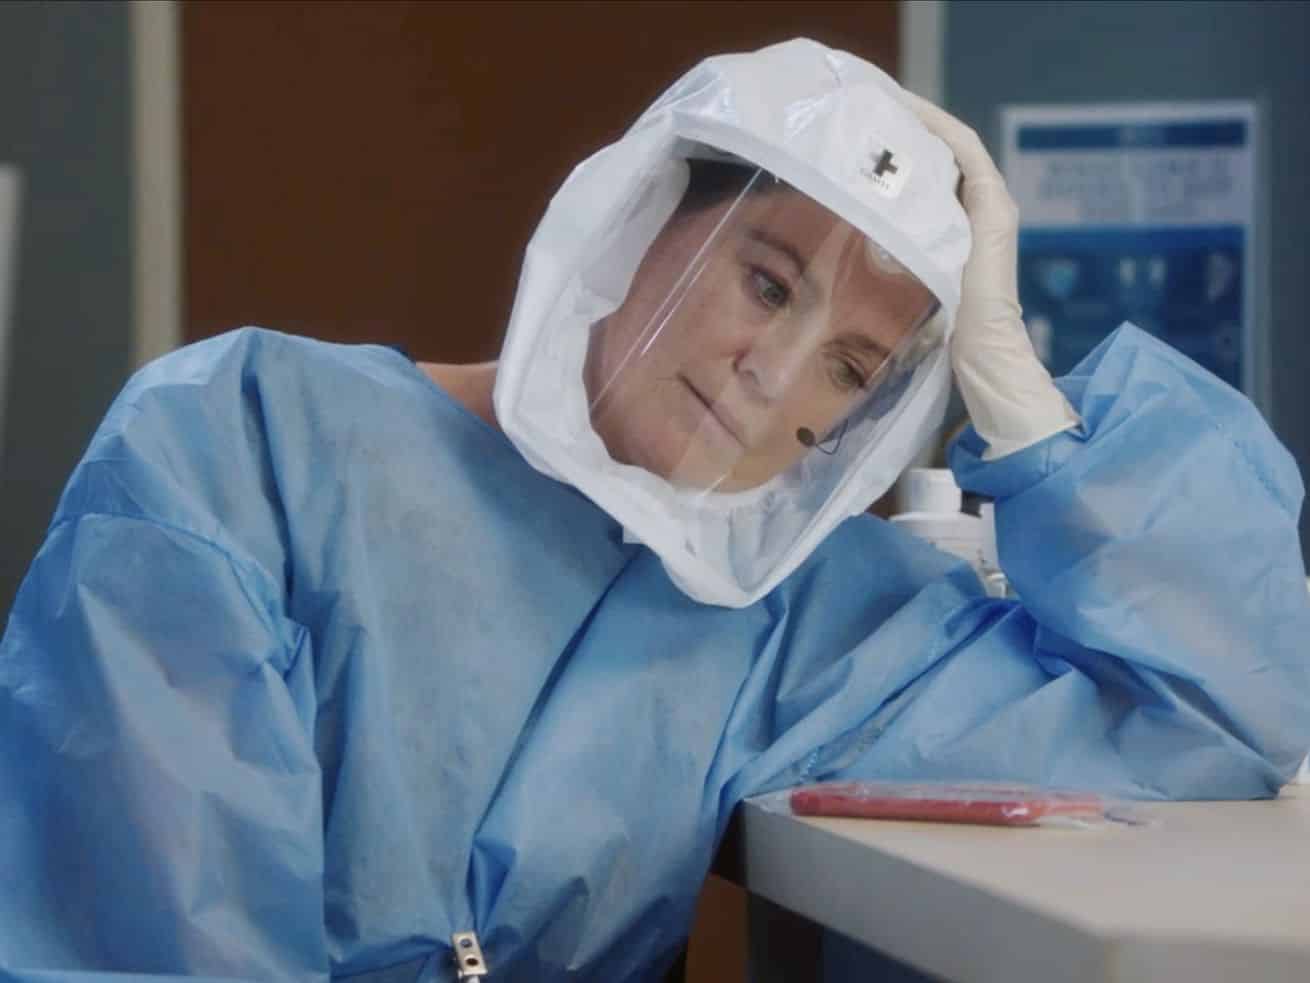 17 seasons in, Grey’s Anatomy reimagined itself for the pandemic. But only a little bit.